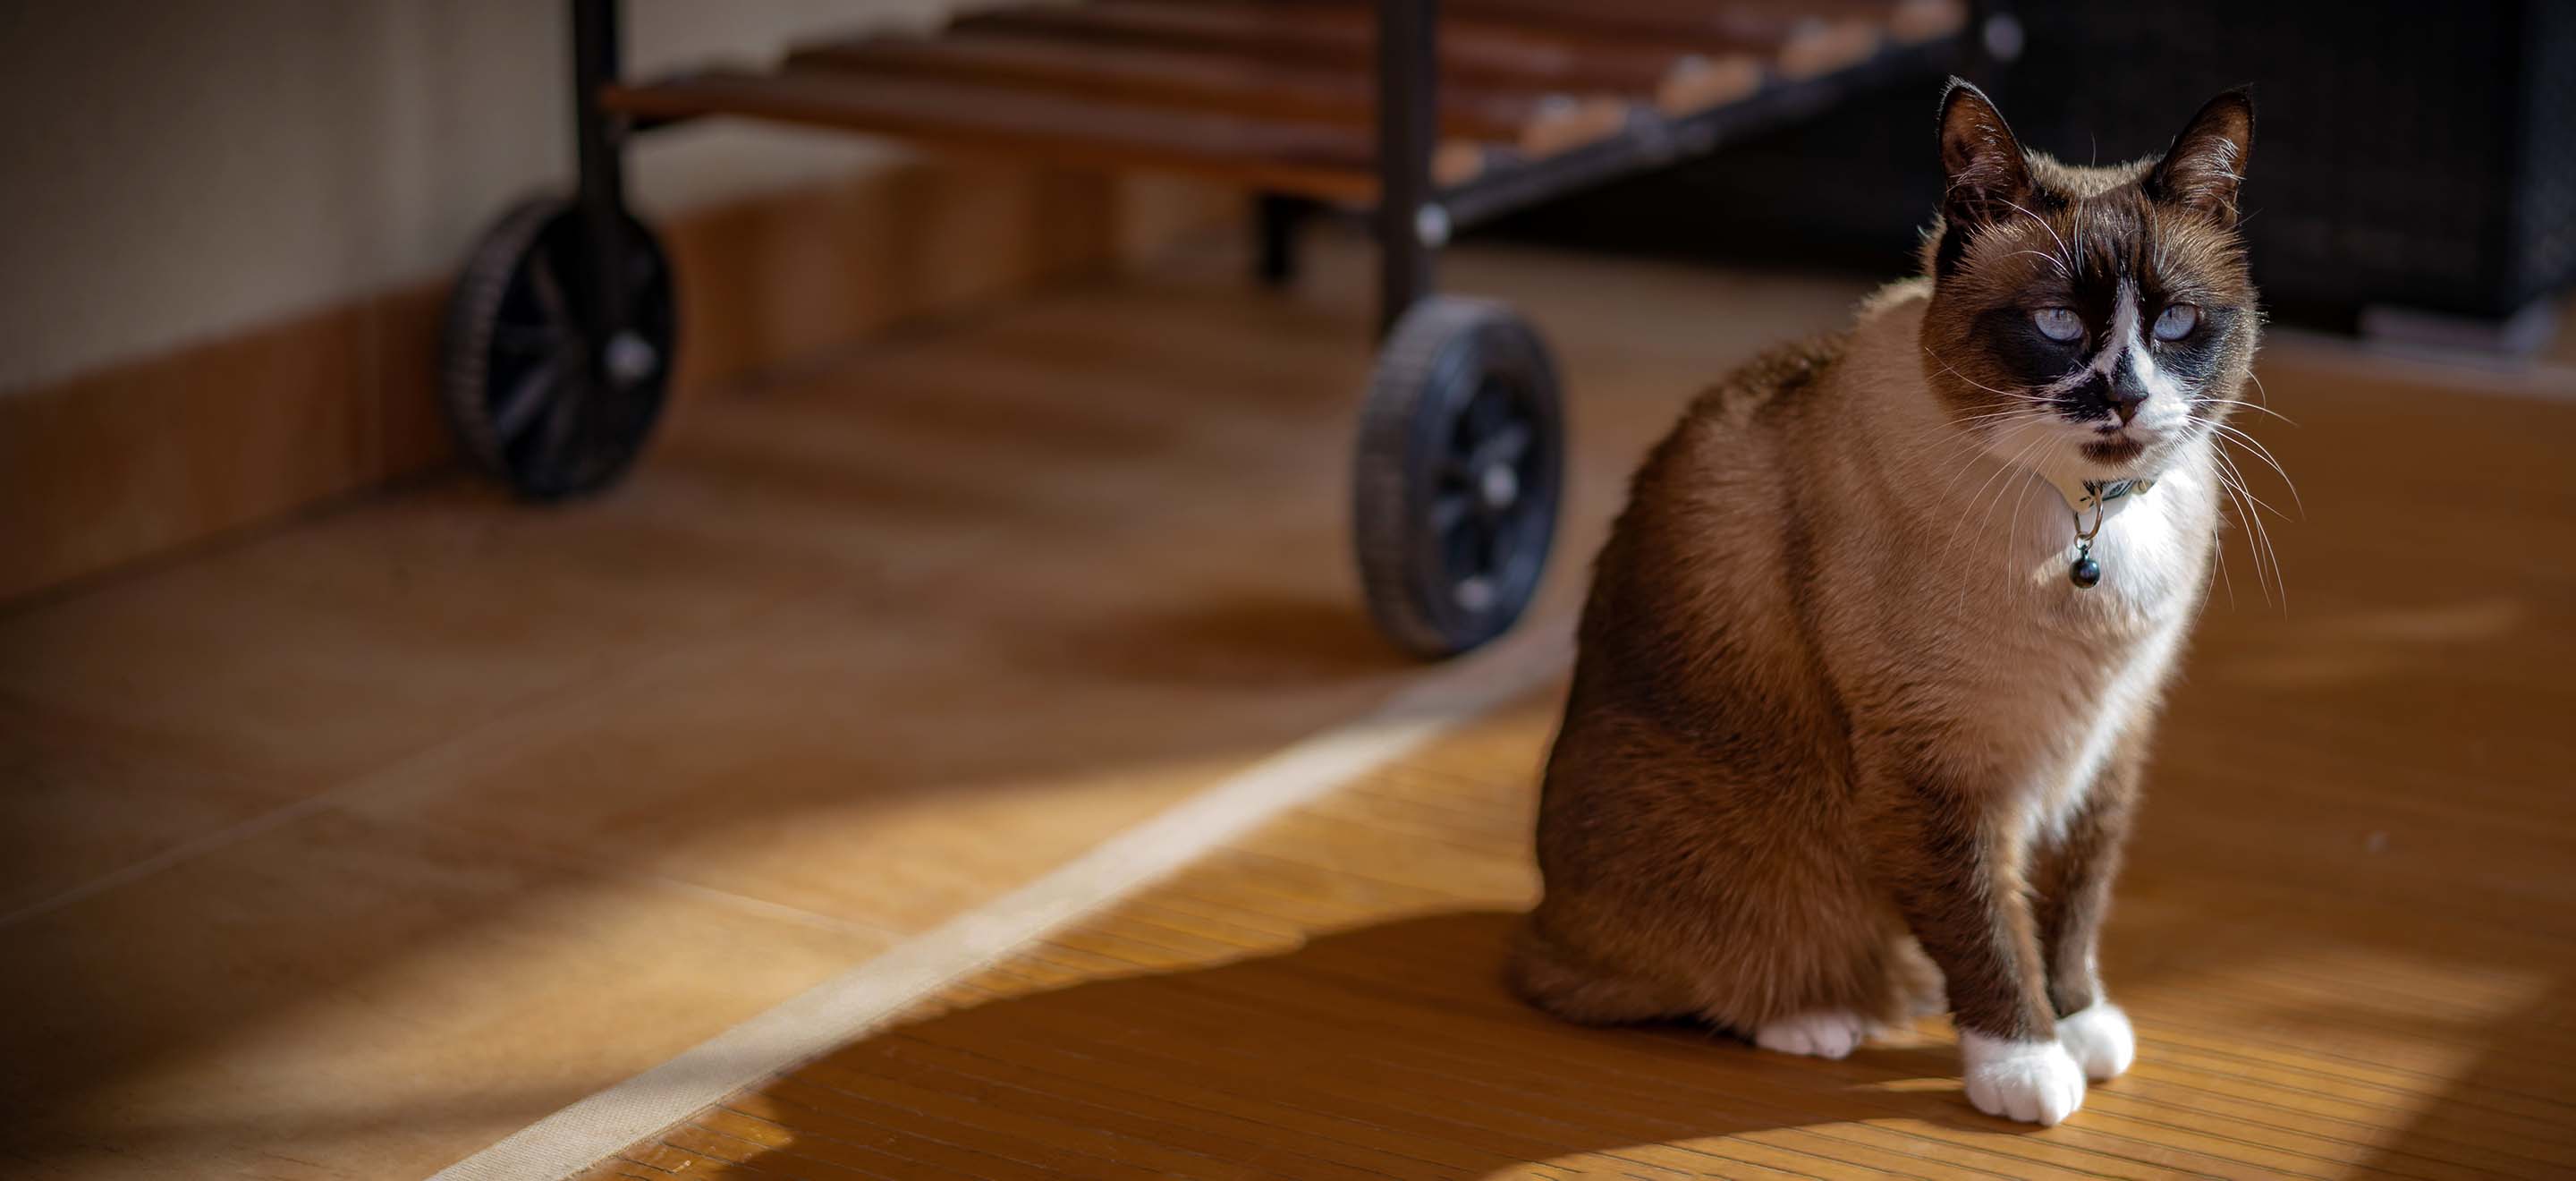 A Snowshoe cat sitting on a wooden floor in front of a wheeled cart image